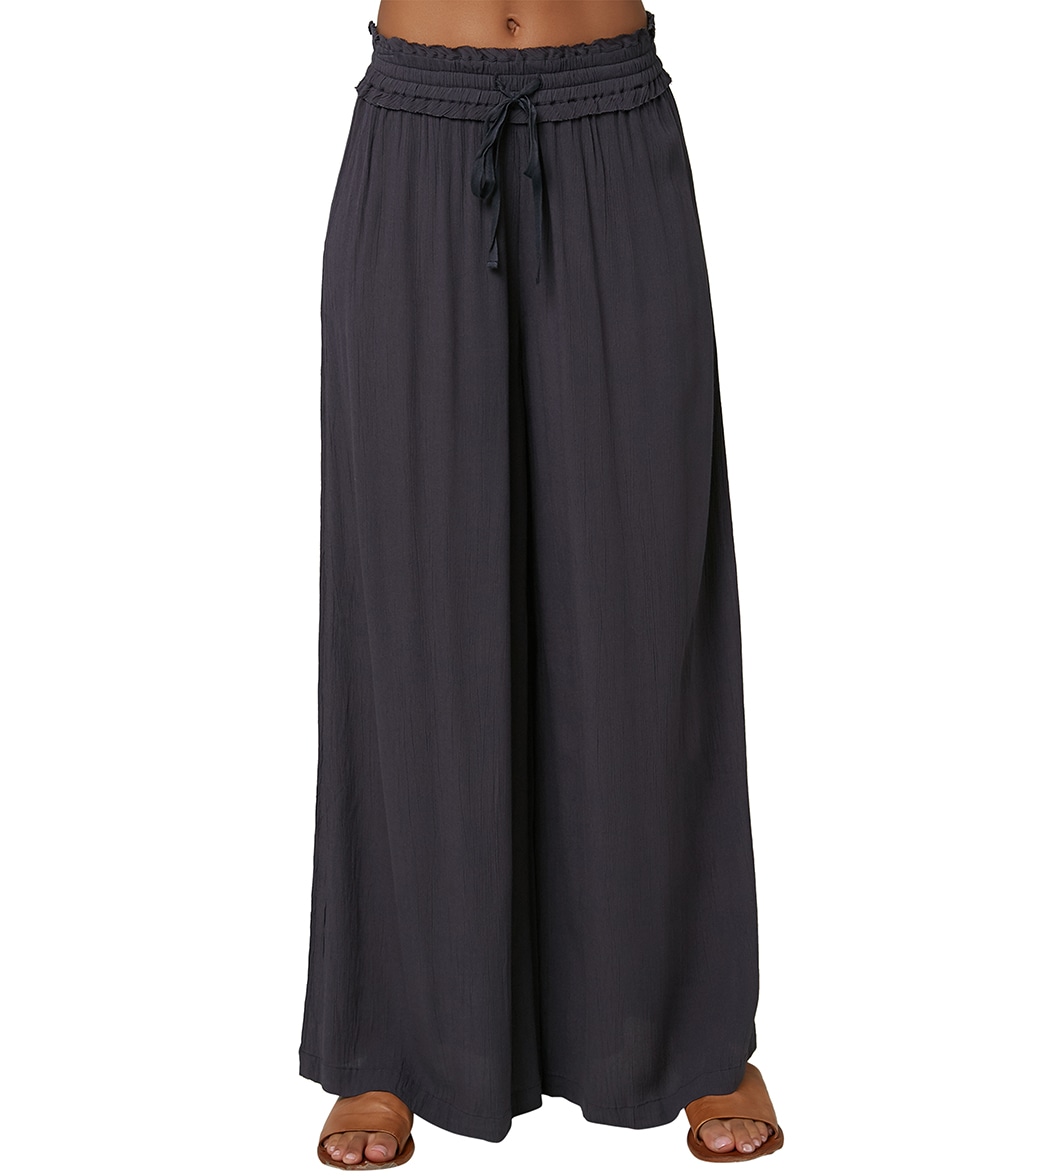 O'neill Women's Ninette Solid Pants - Charcoal Small - Swimoutlet.com